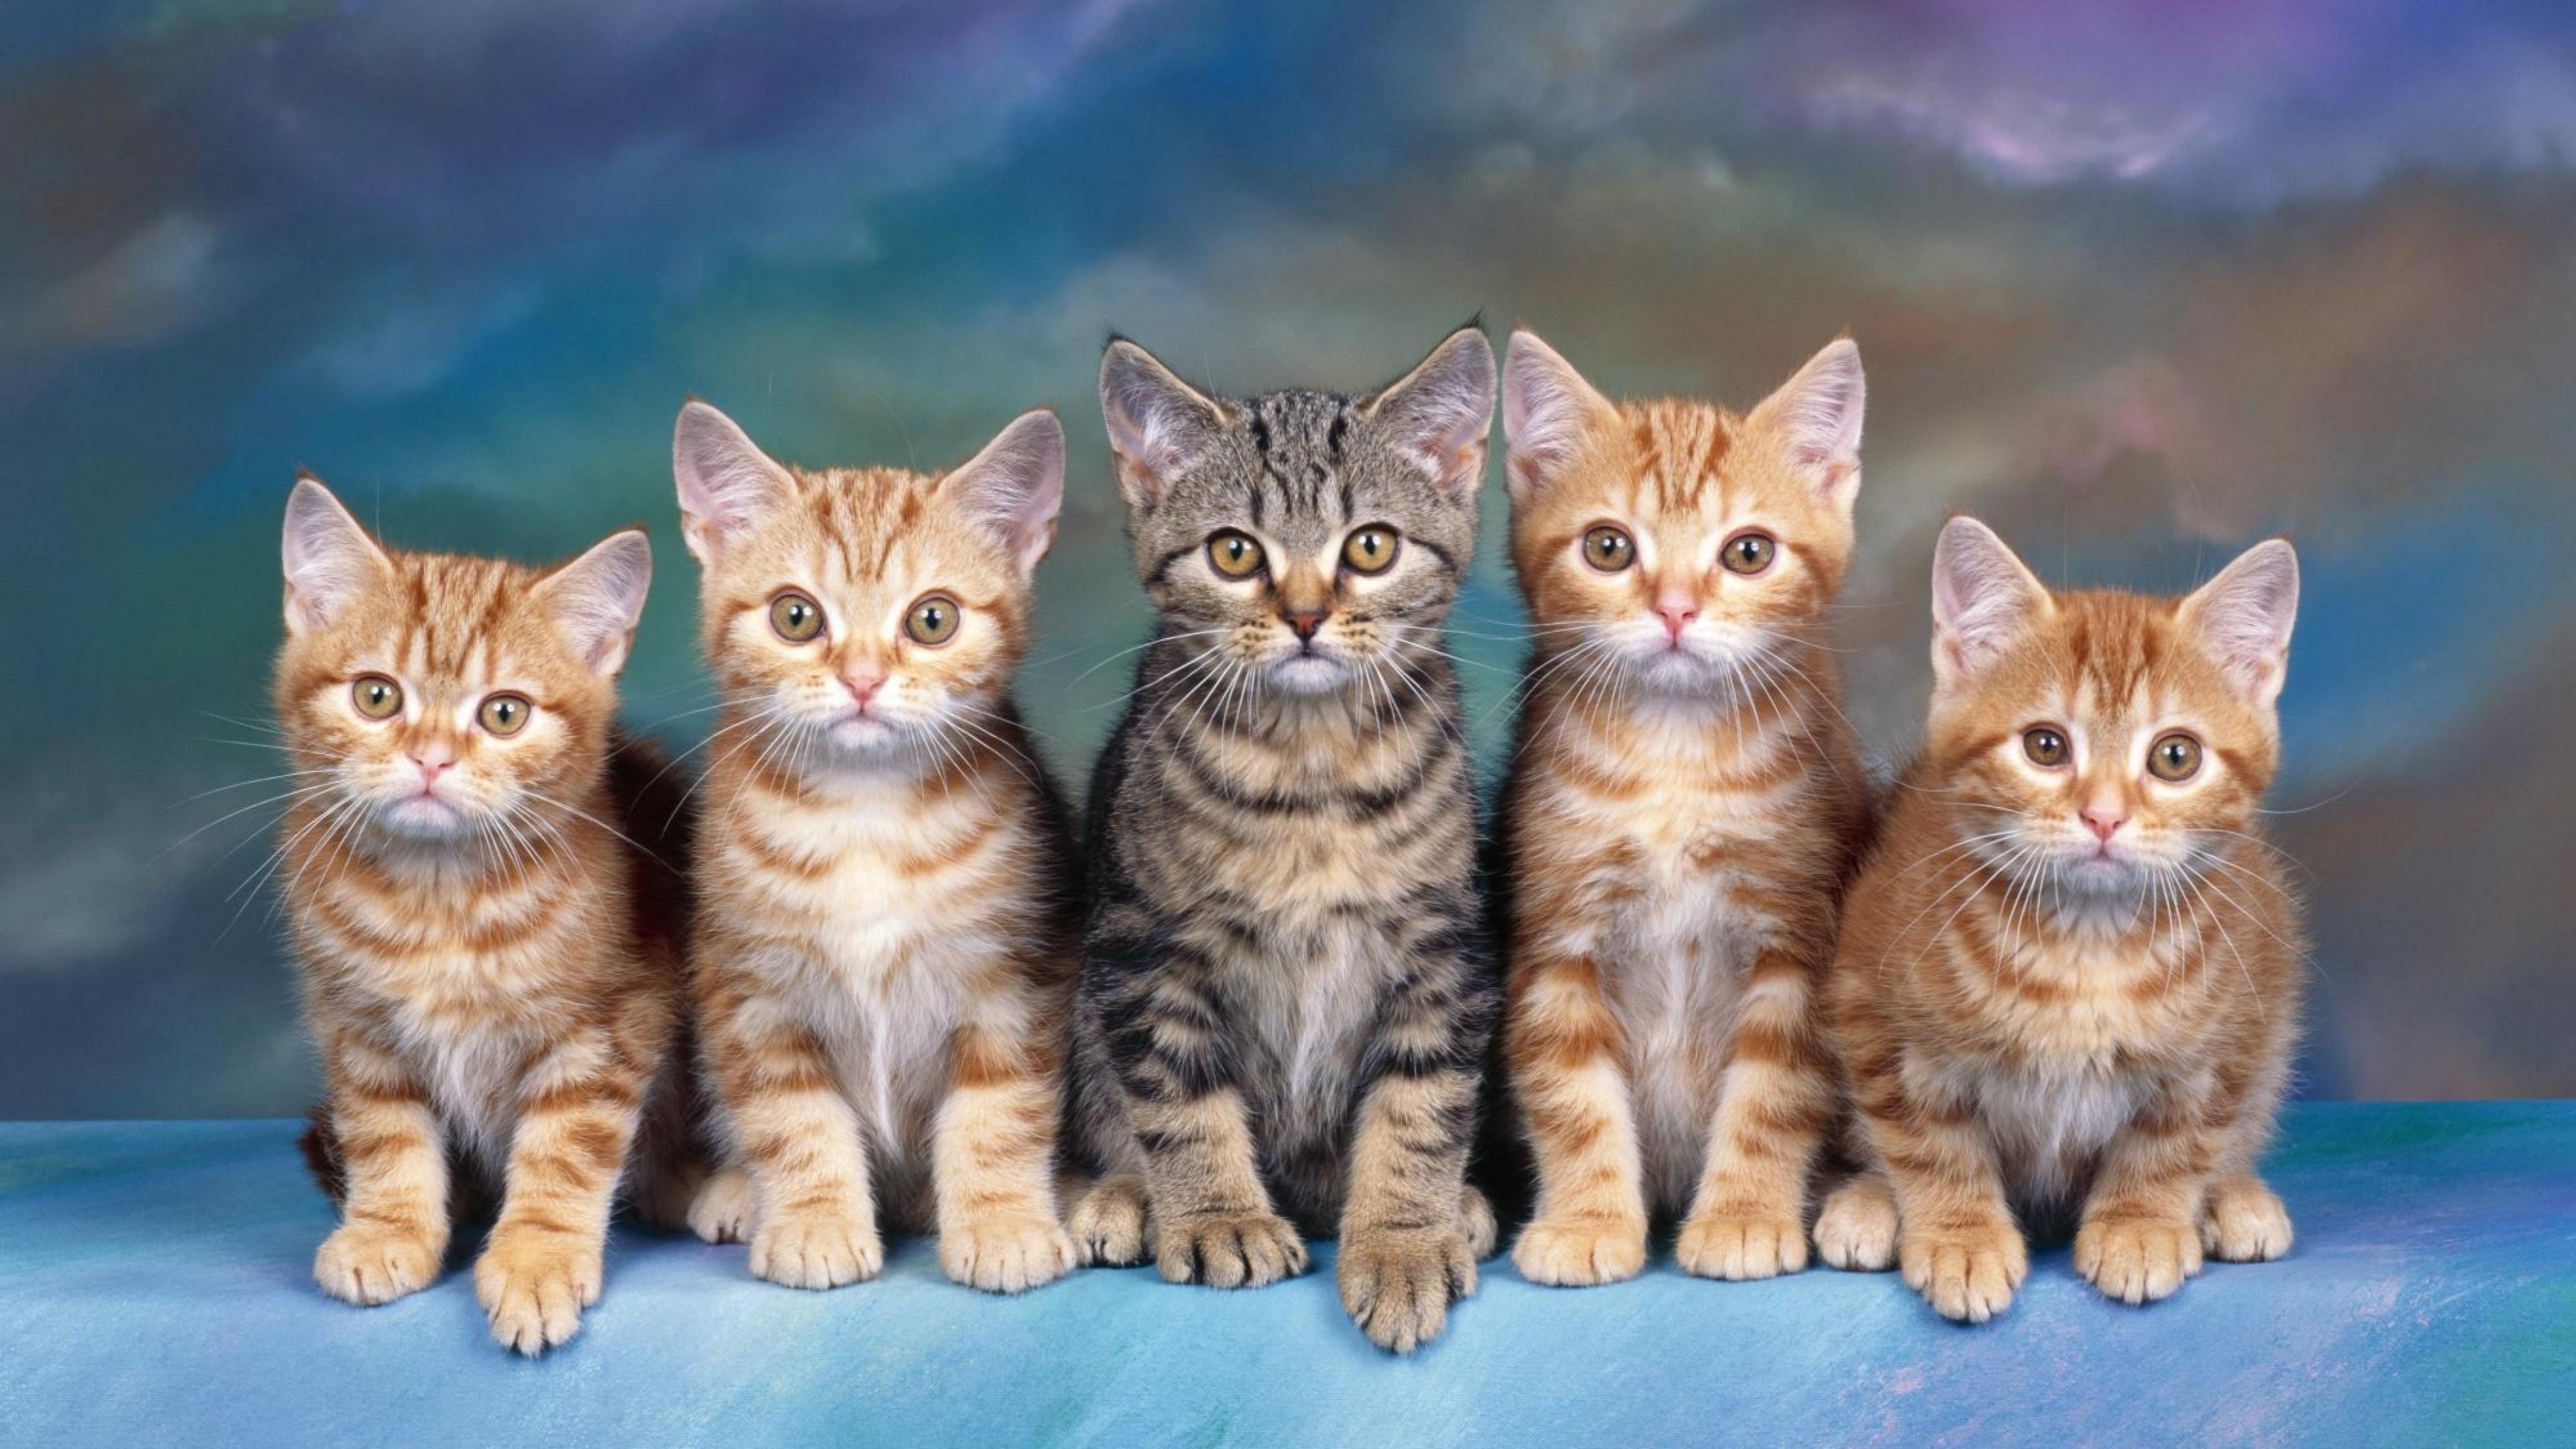 Wallpapers cats kittens animals on the desktop